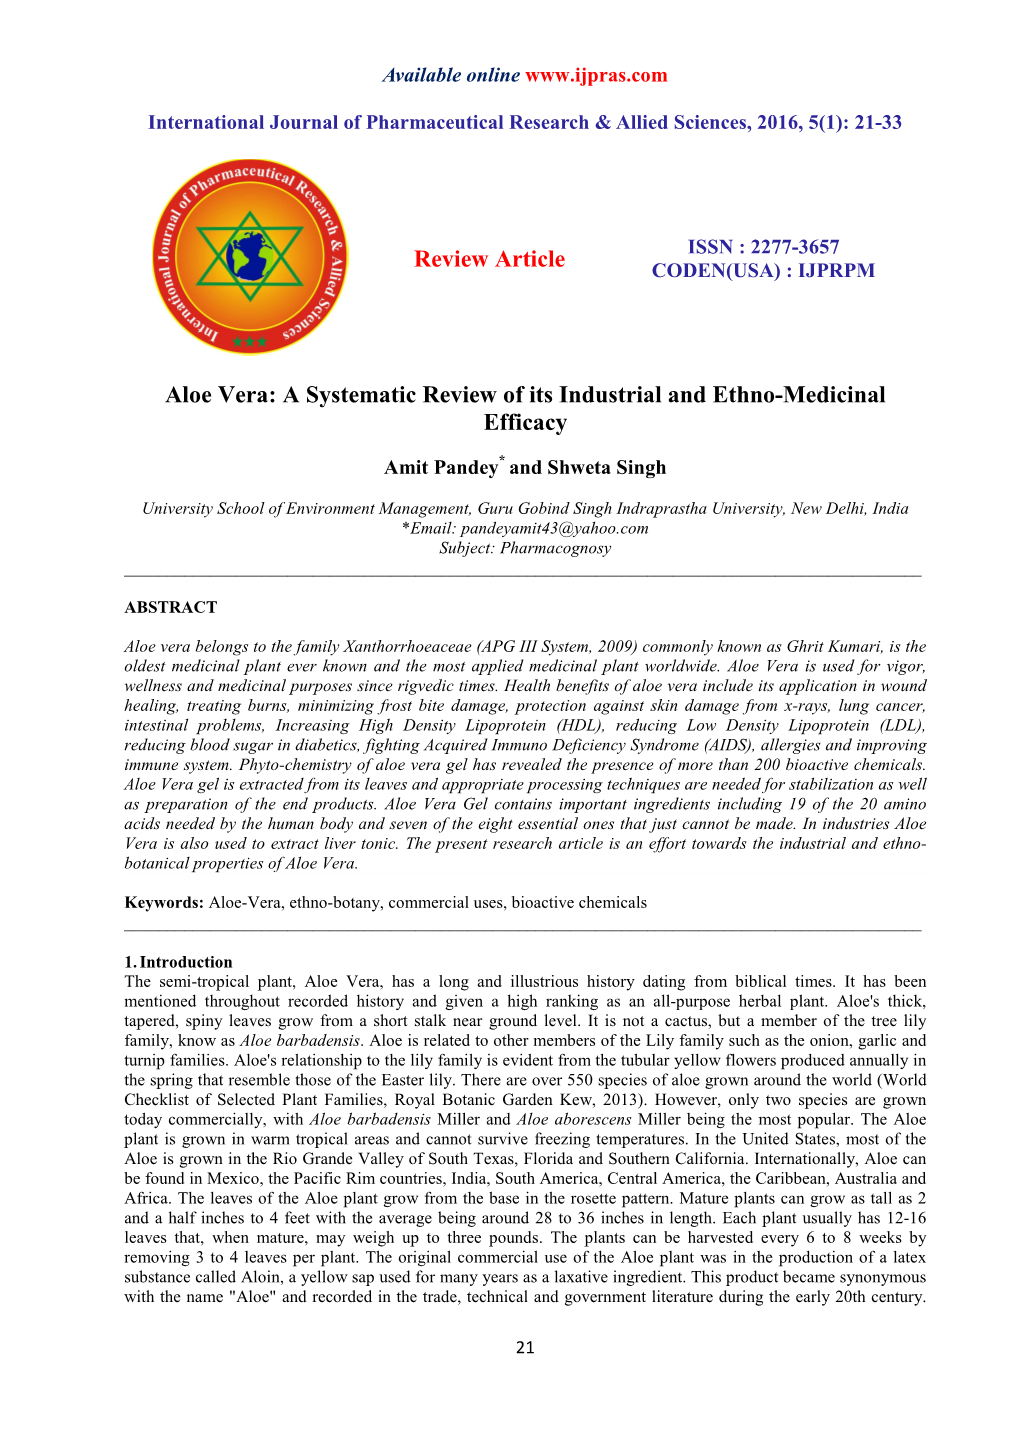 A Systematic Review of Its Industrial and Ethno-Medicinal Efficacy